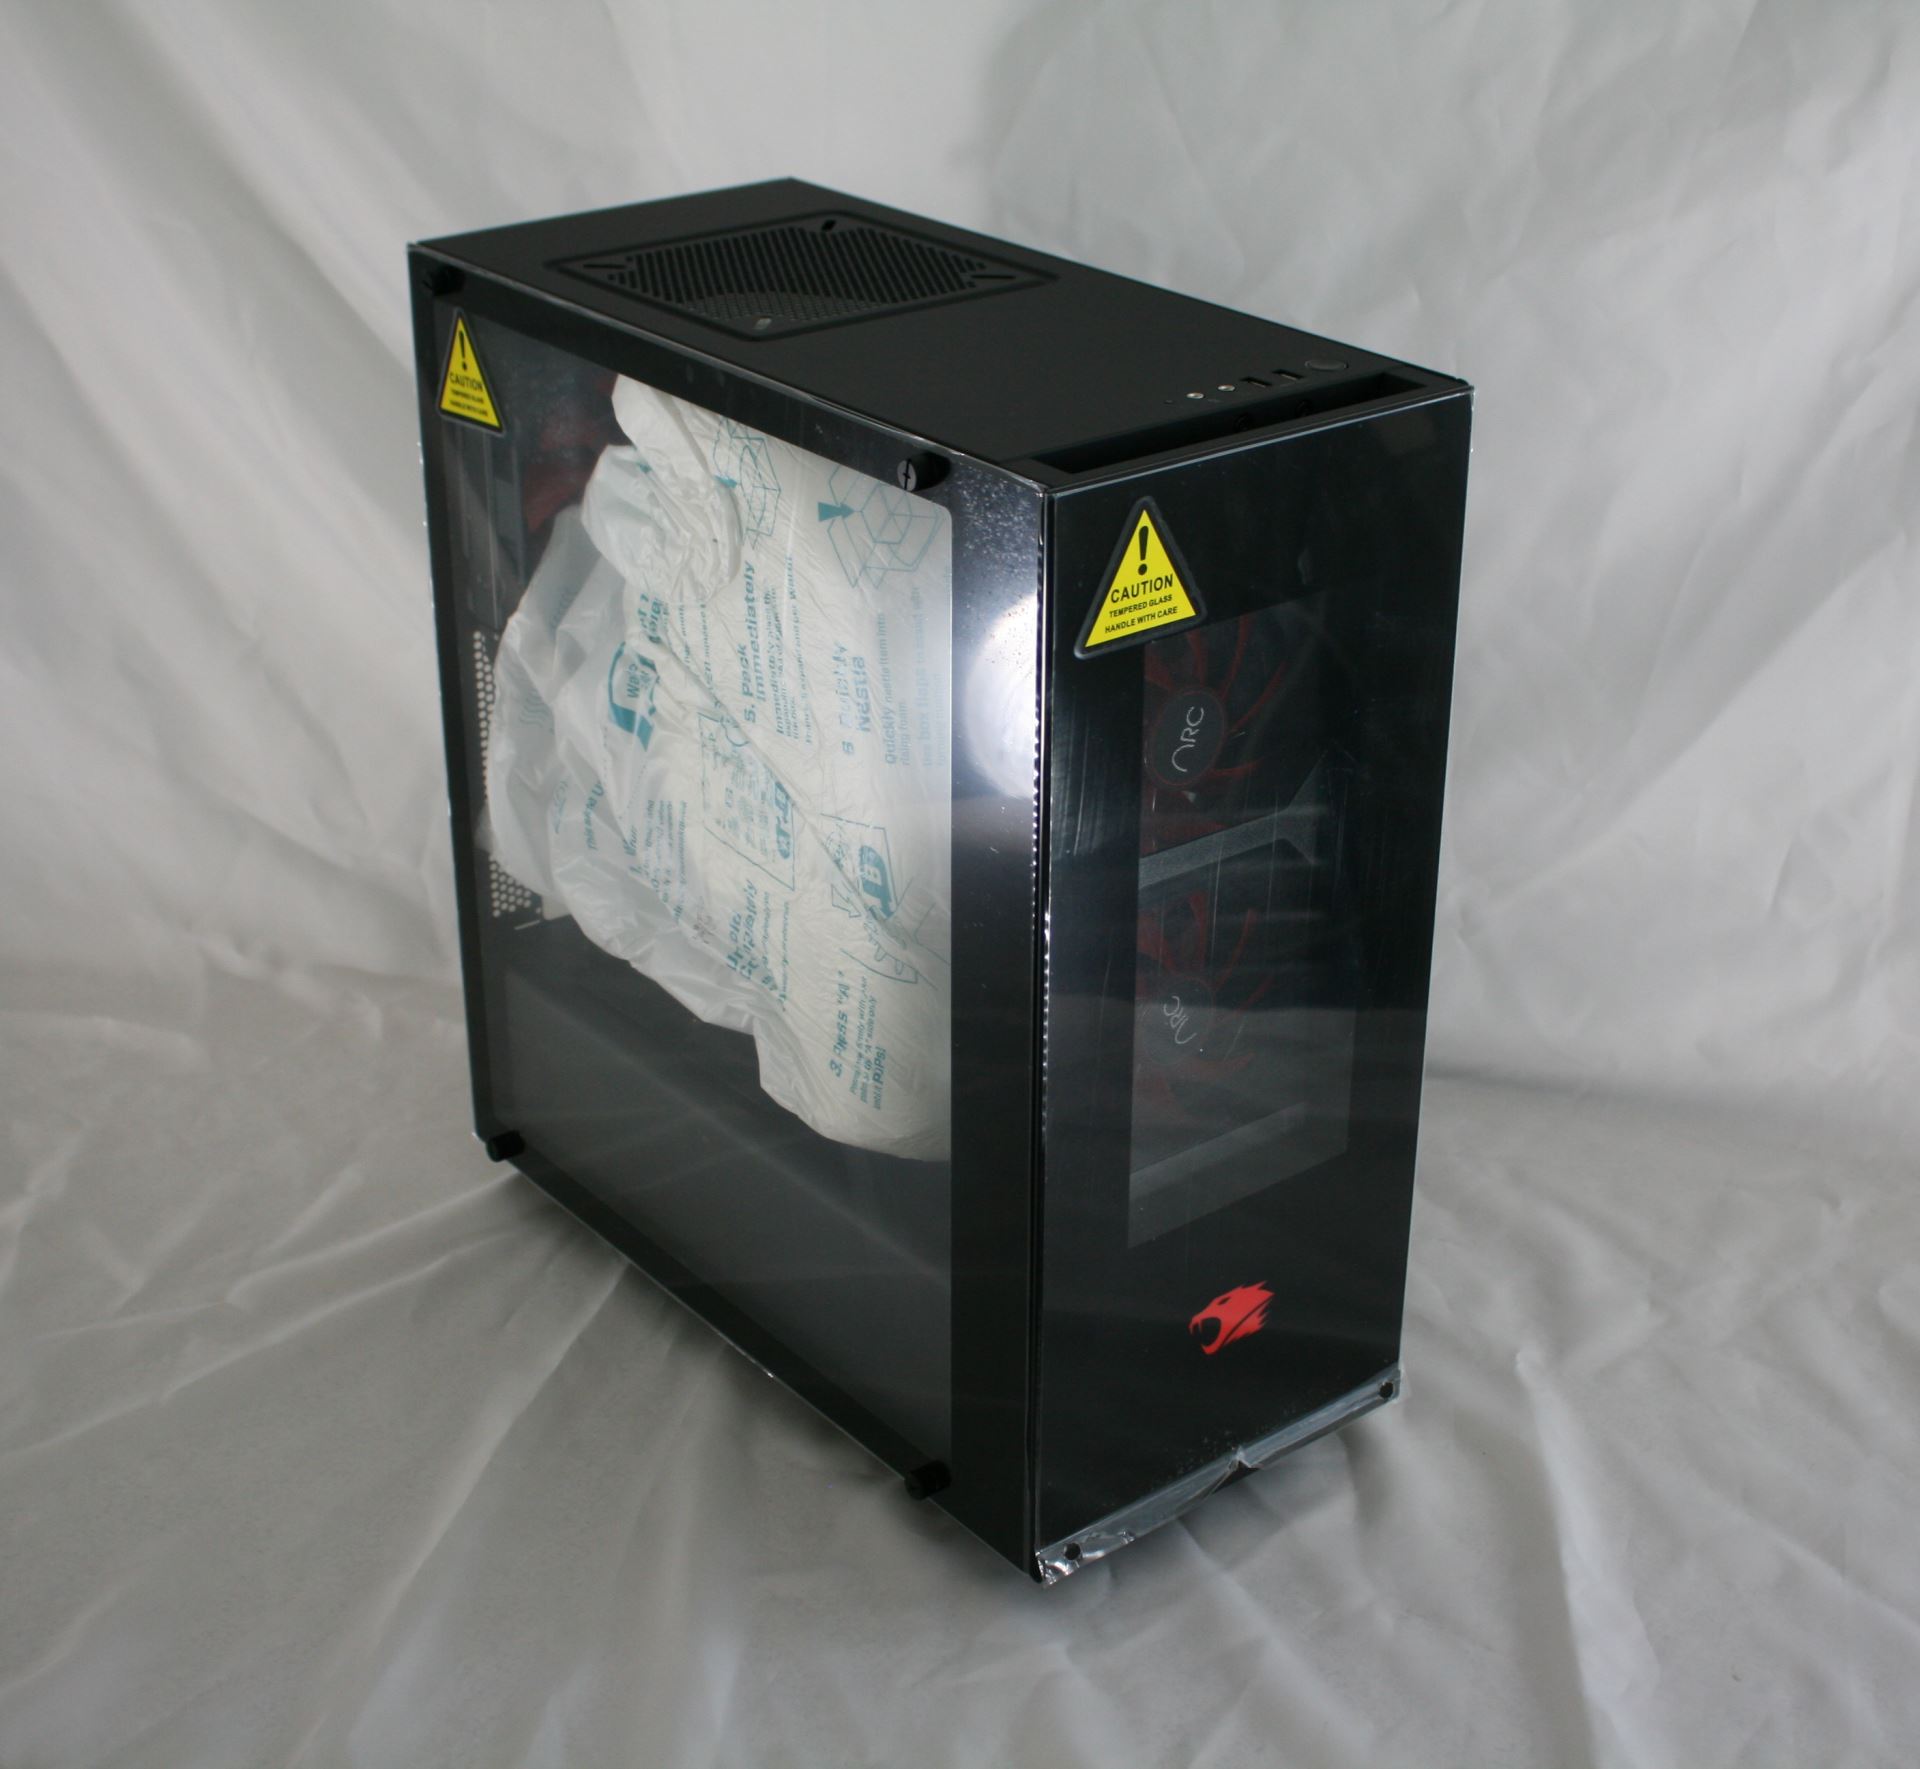 How To Find PC Case Model IBuyPower